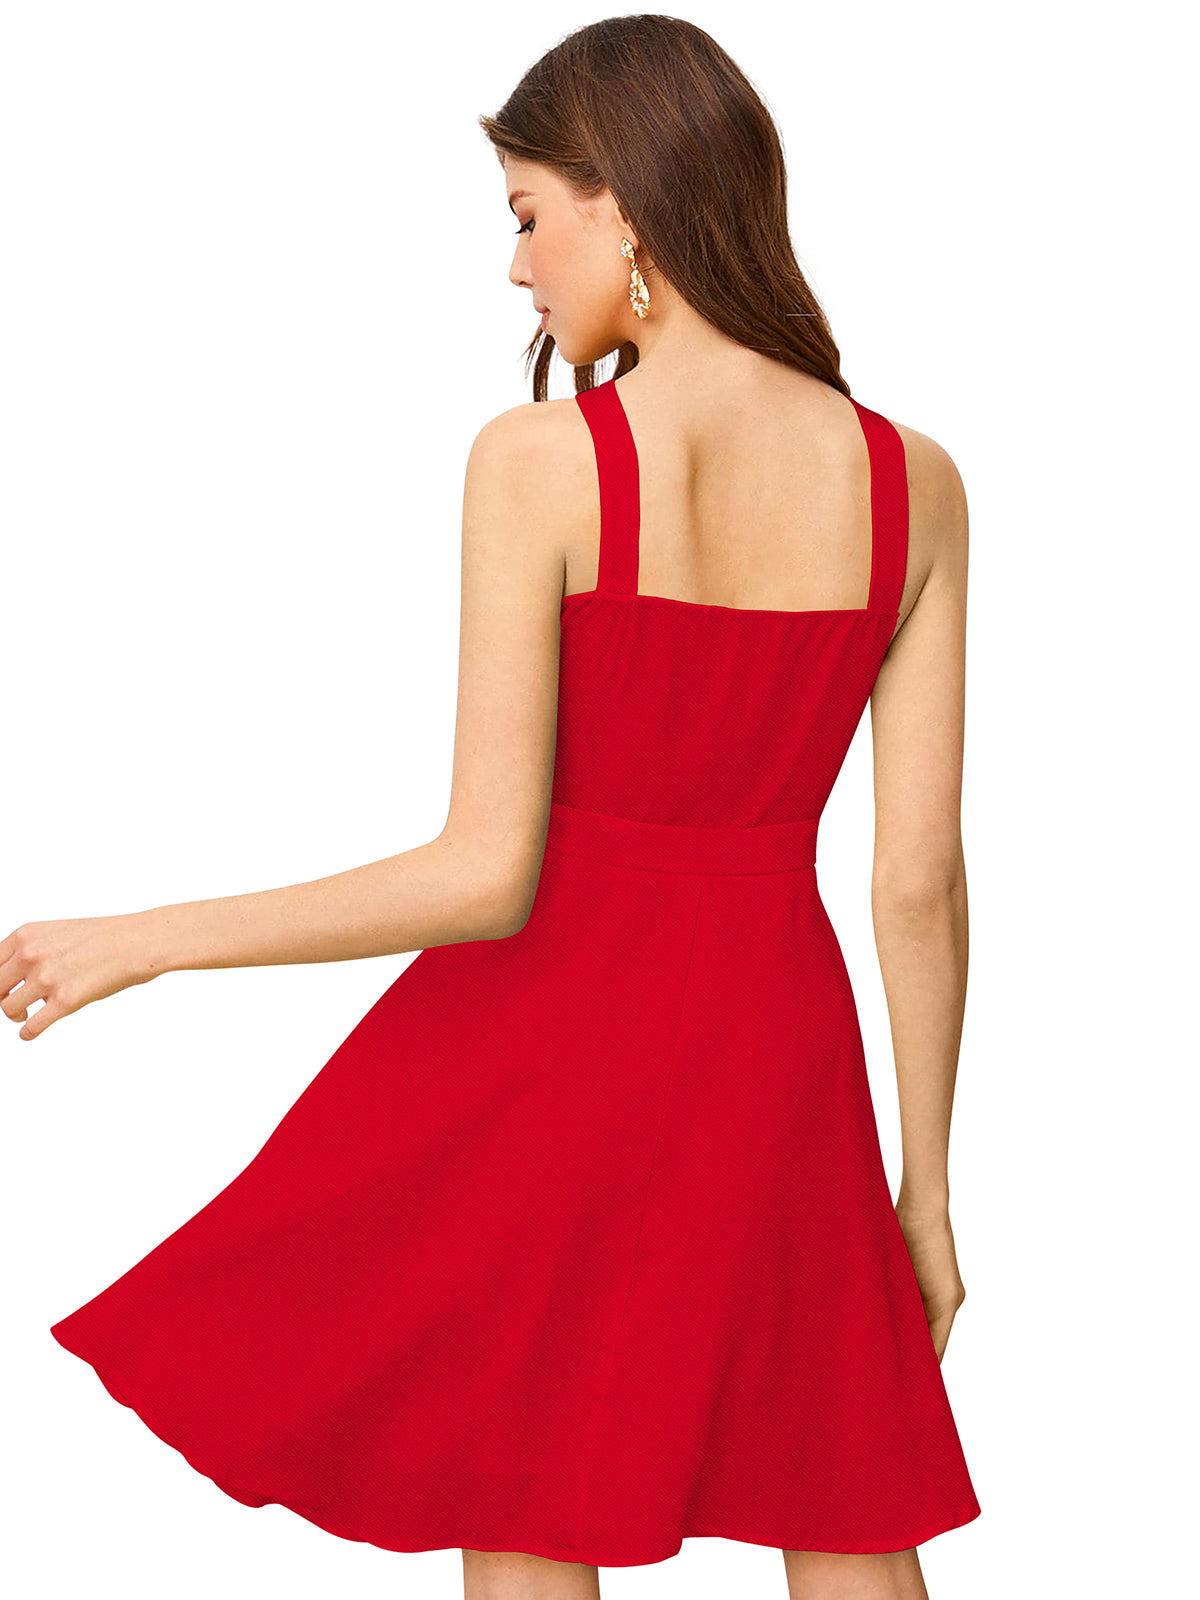 Stylish One piece Party Wear Red